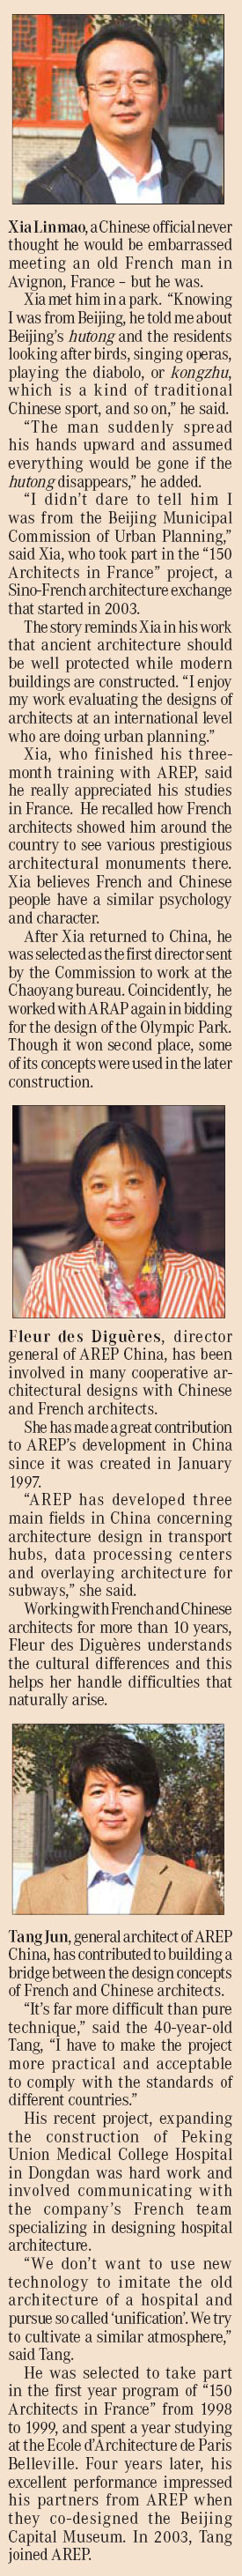 AREP an avid supporter of China